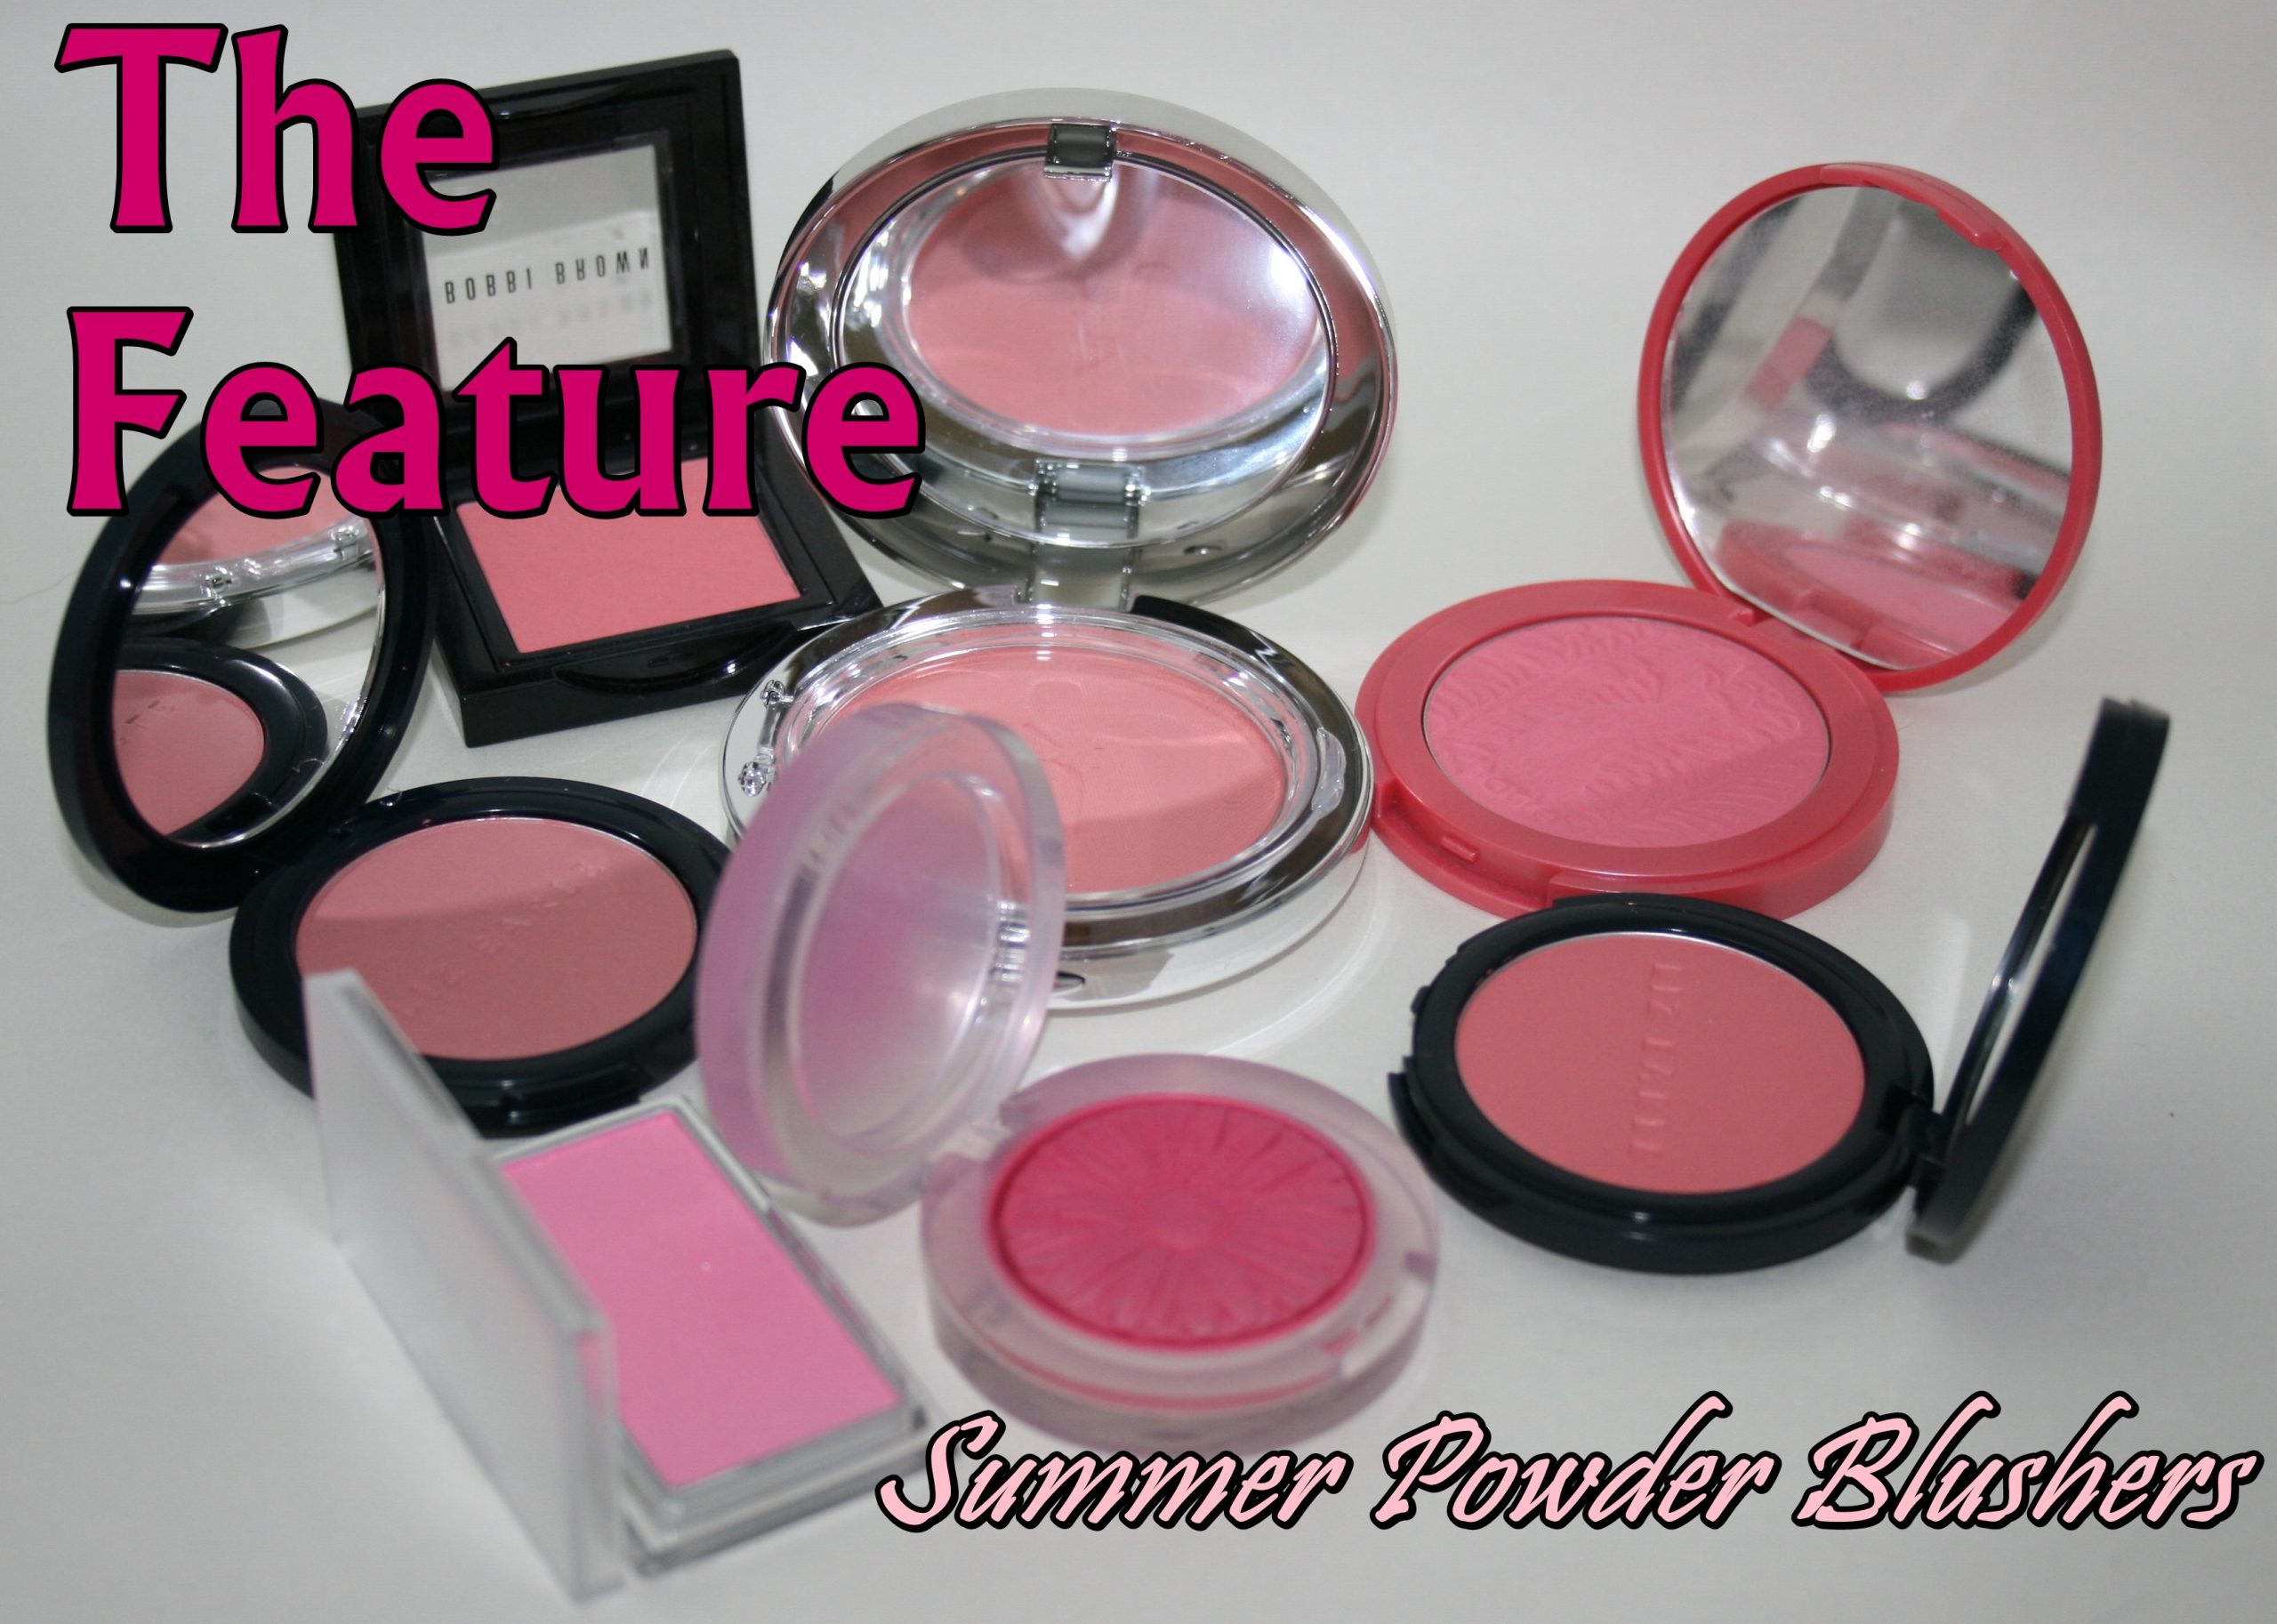 The Feature: Summer Powder Blushers